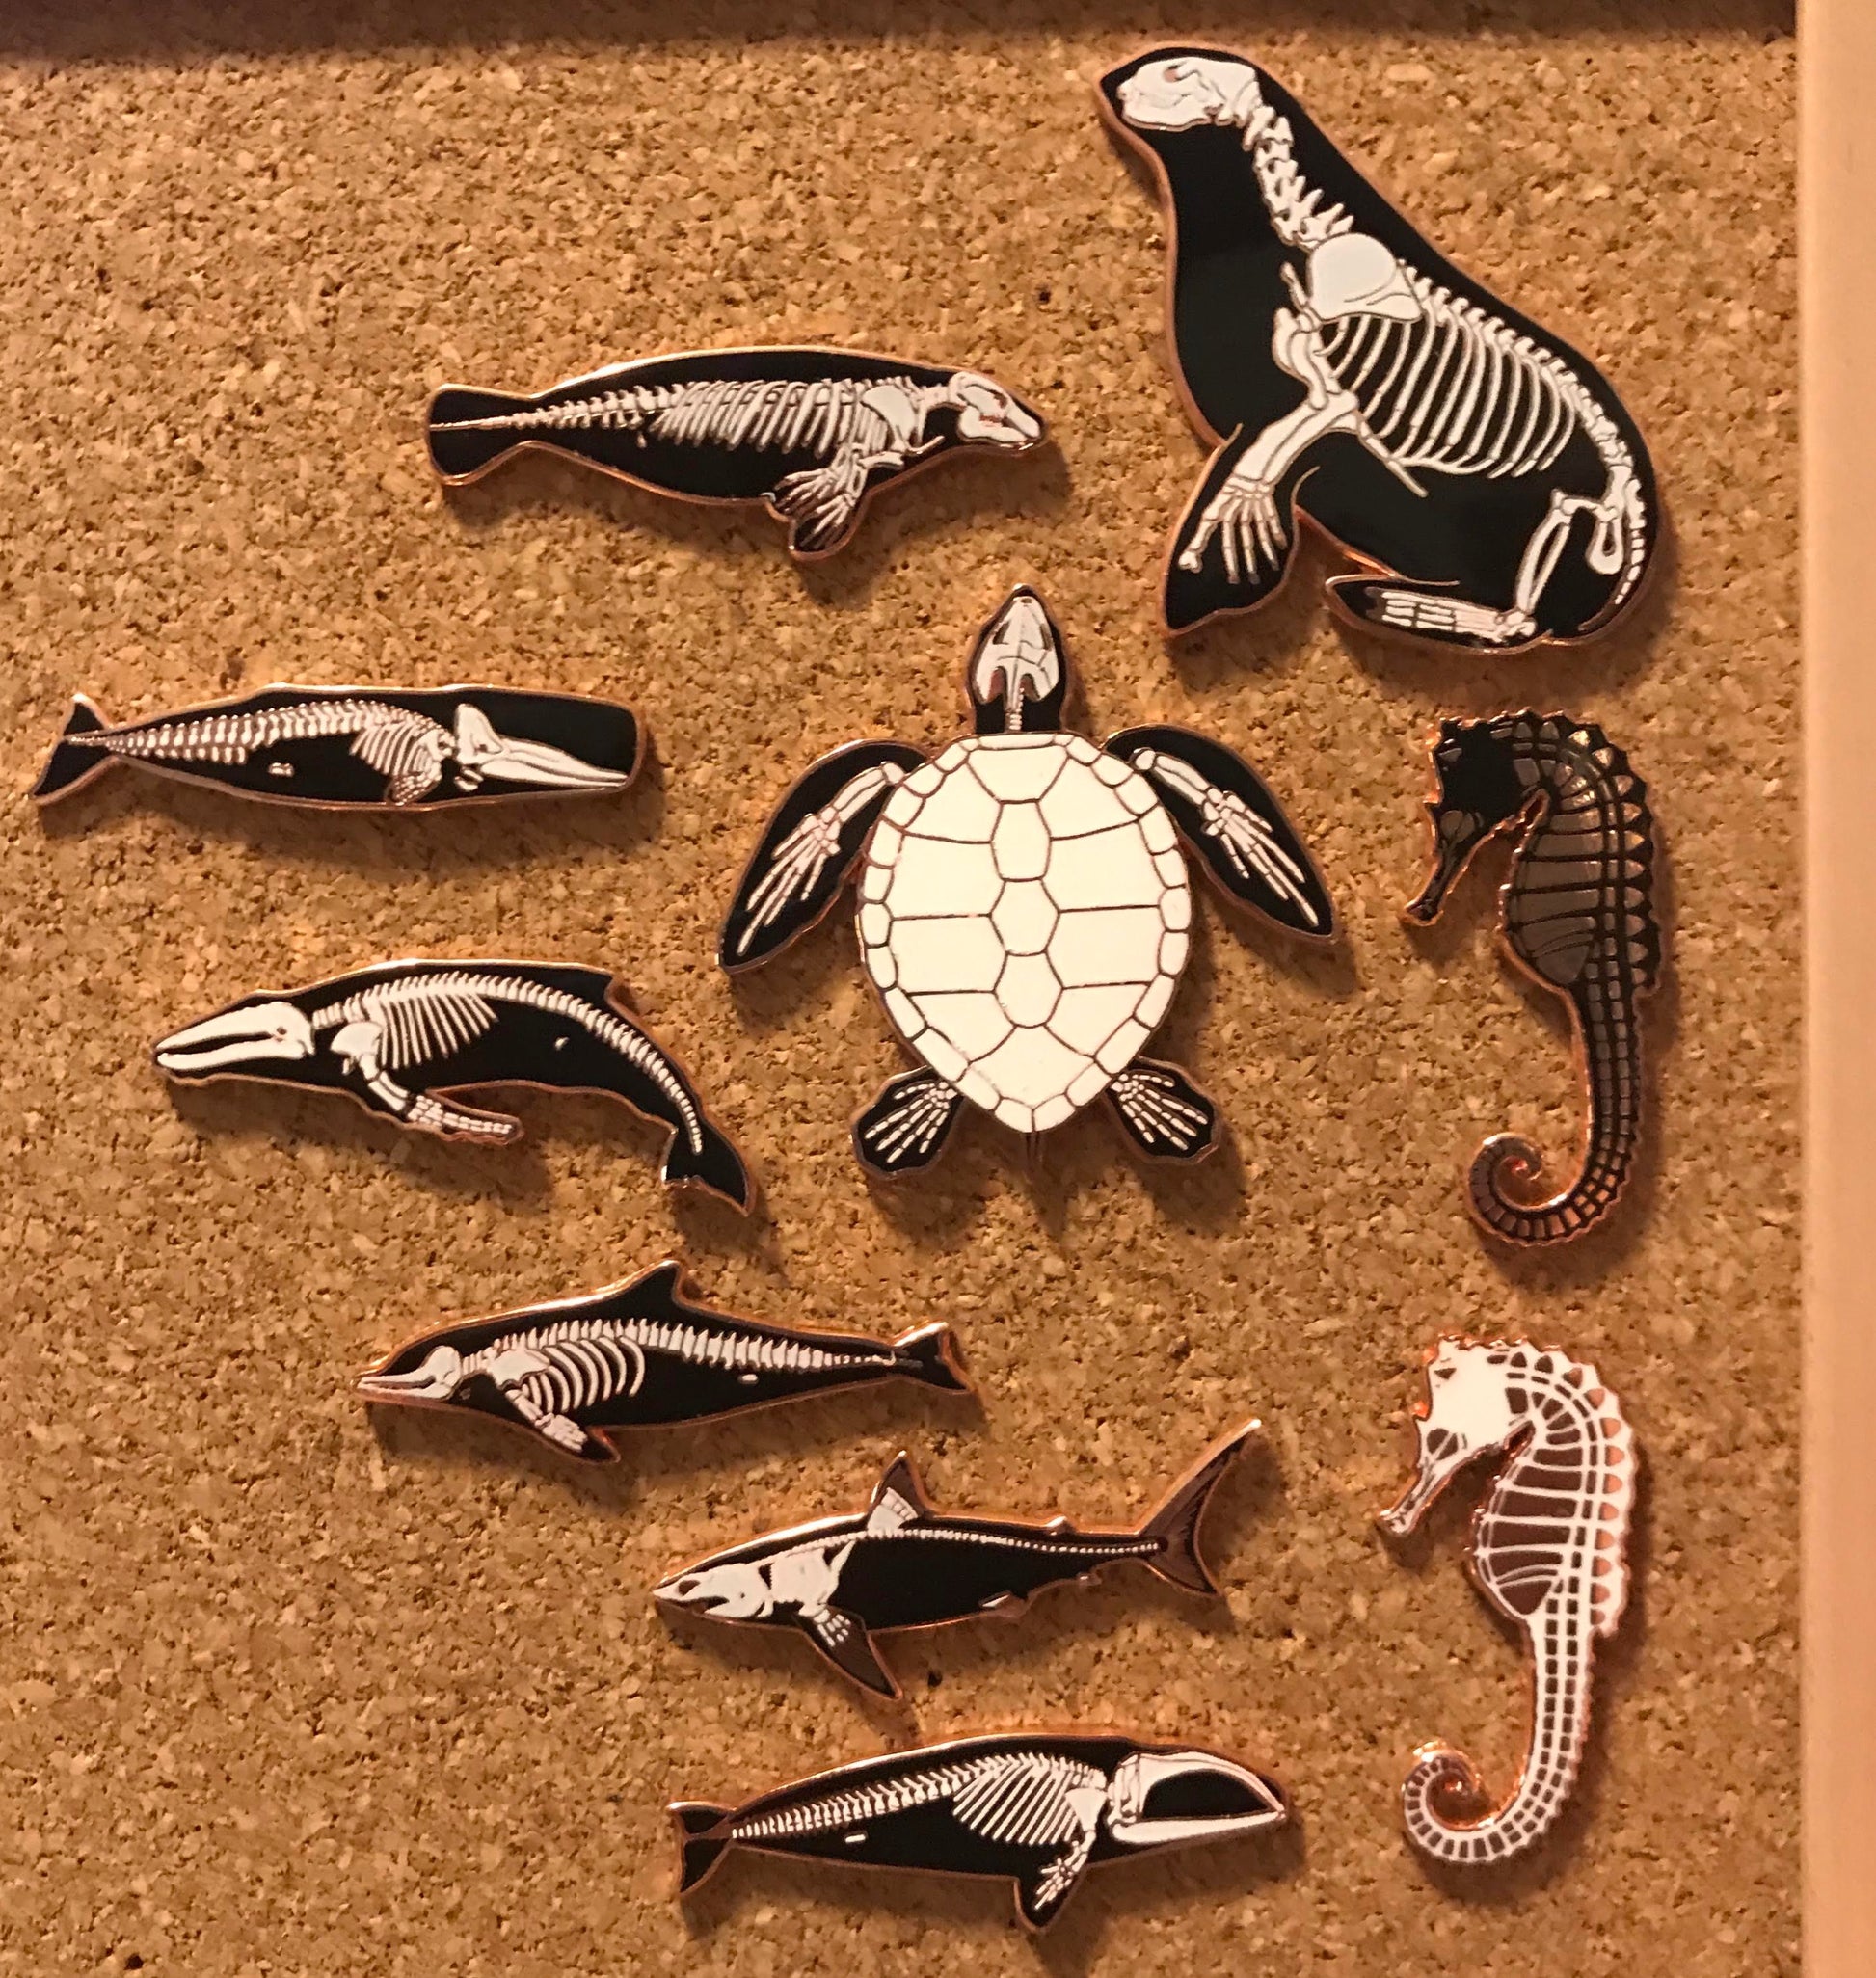 humpback whale skelepin donation item